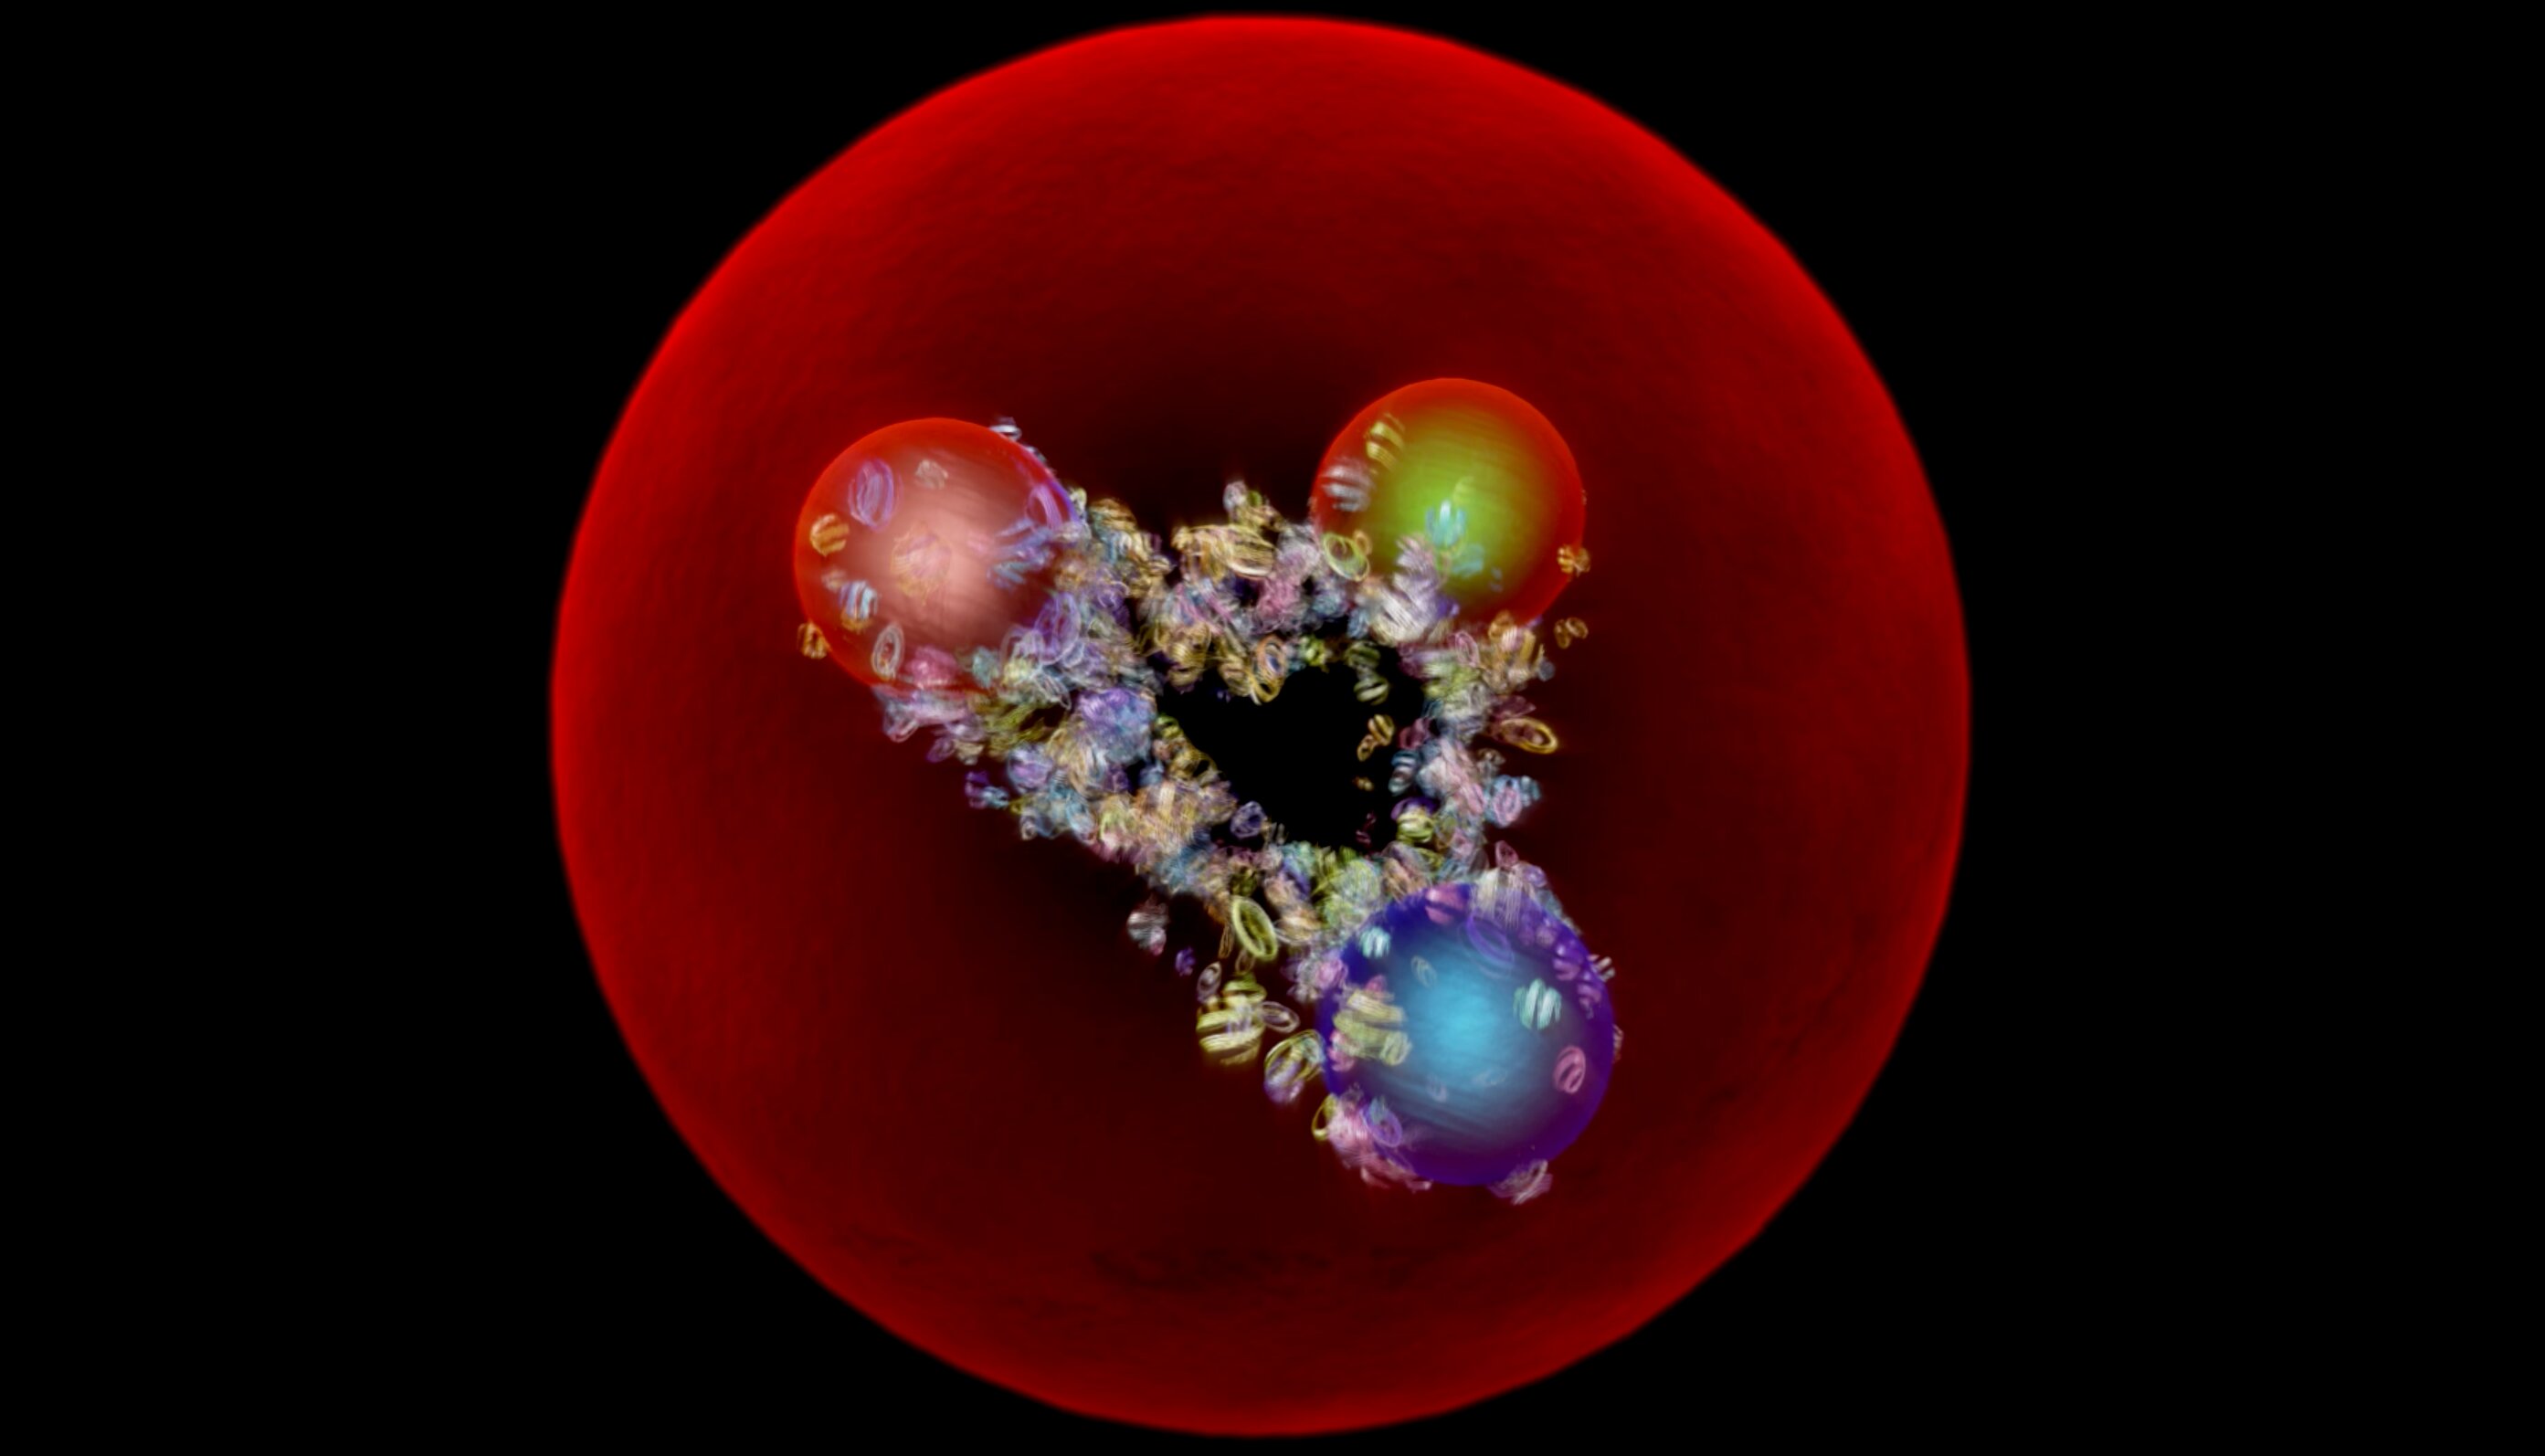 New insight into the internal structure of the proton